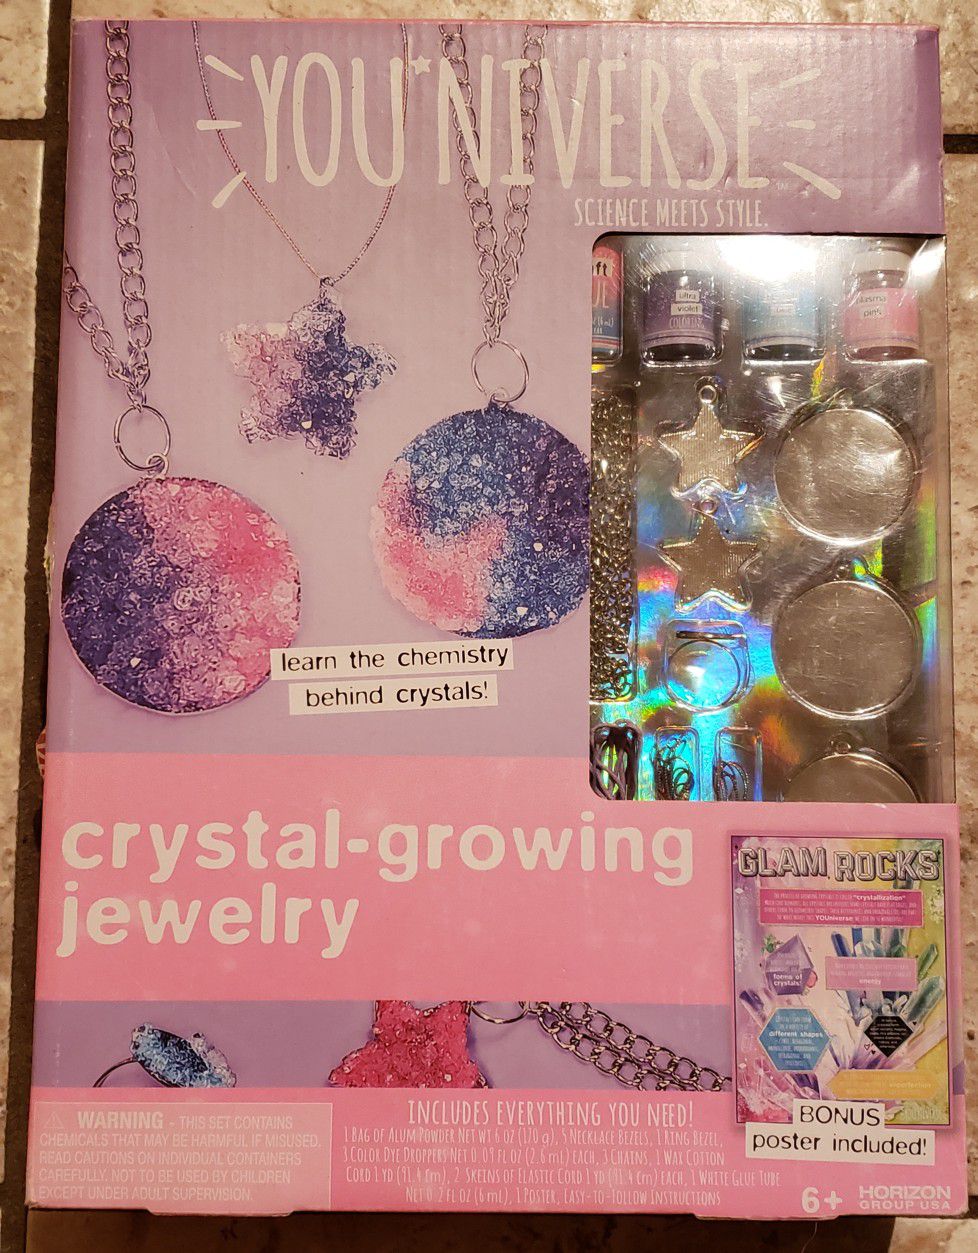 Brand new Crystal Growing Jewelry making set!